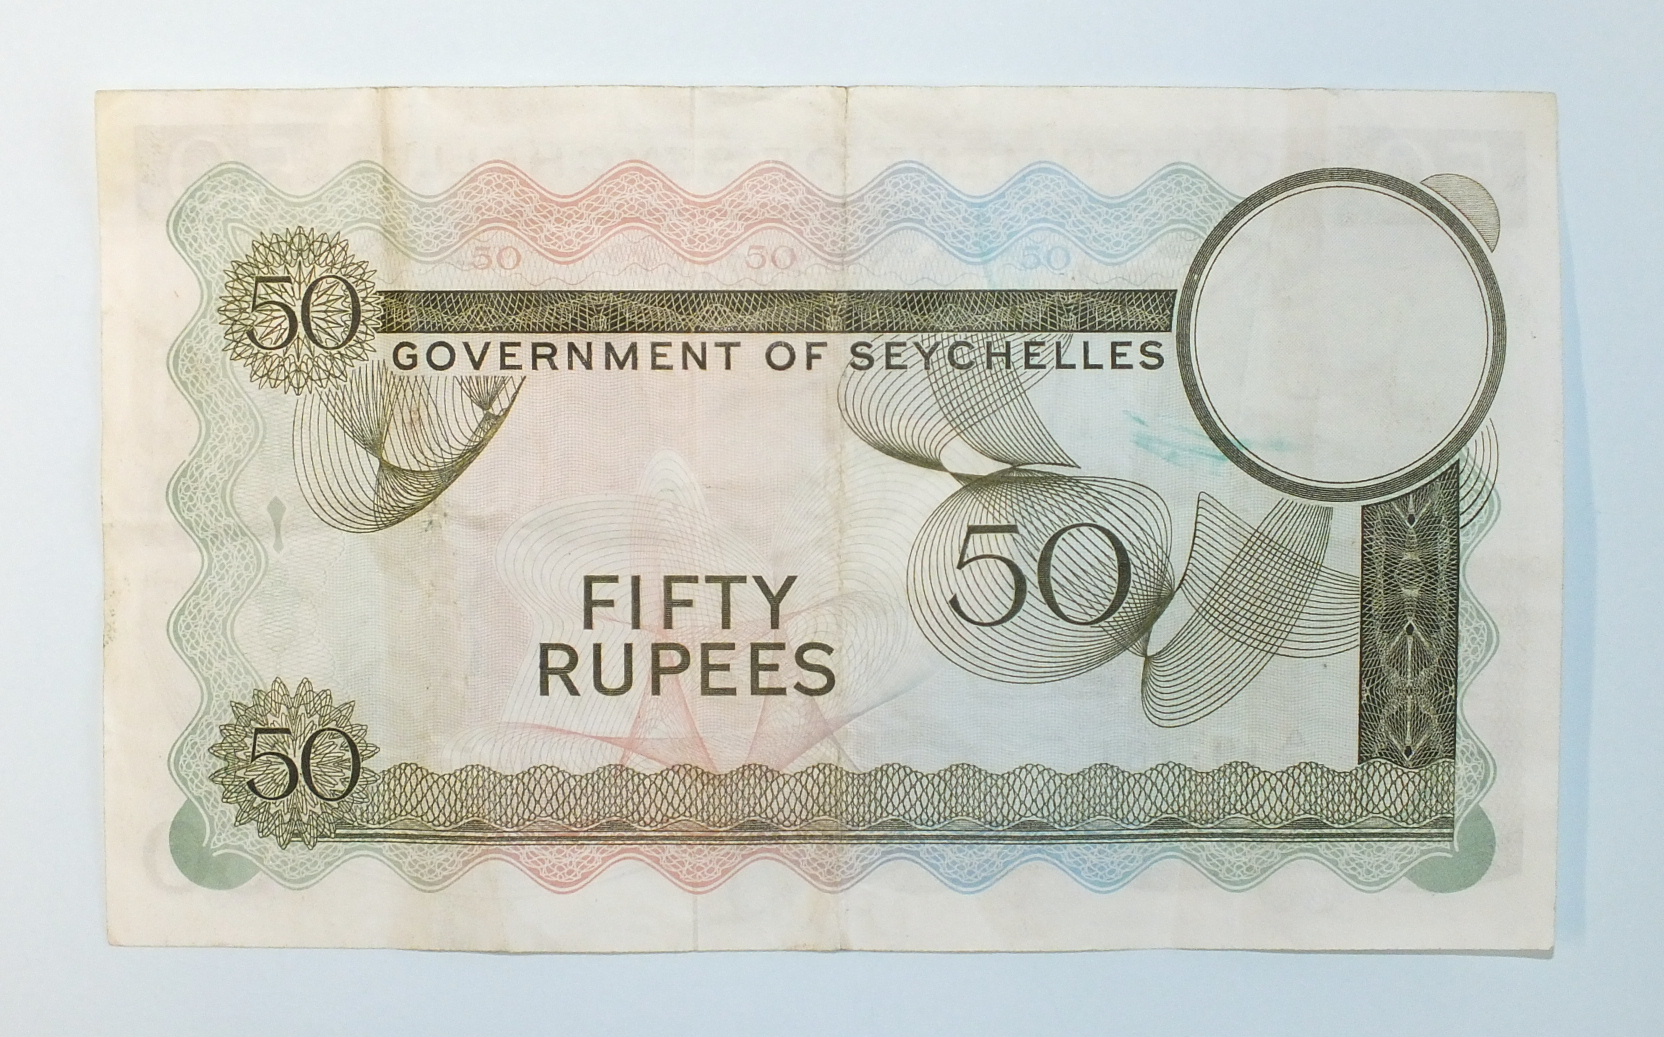 A Government of Seychelles 50 rupees bank note, A/1 197181, dated 1st August 1973, centre crease. - Image 2 of 2